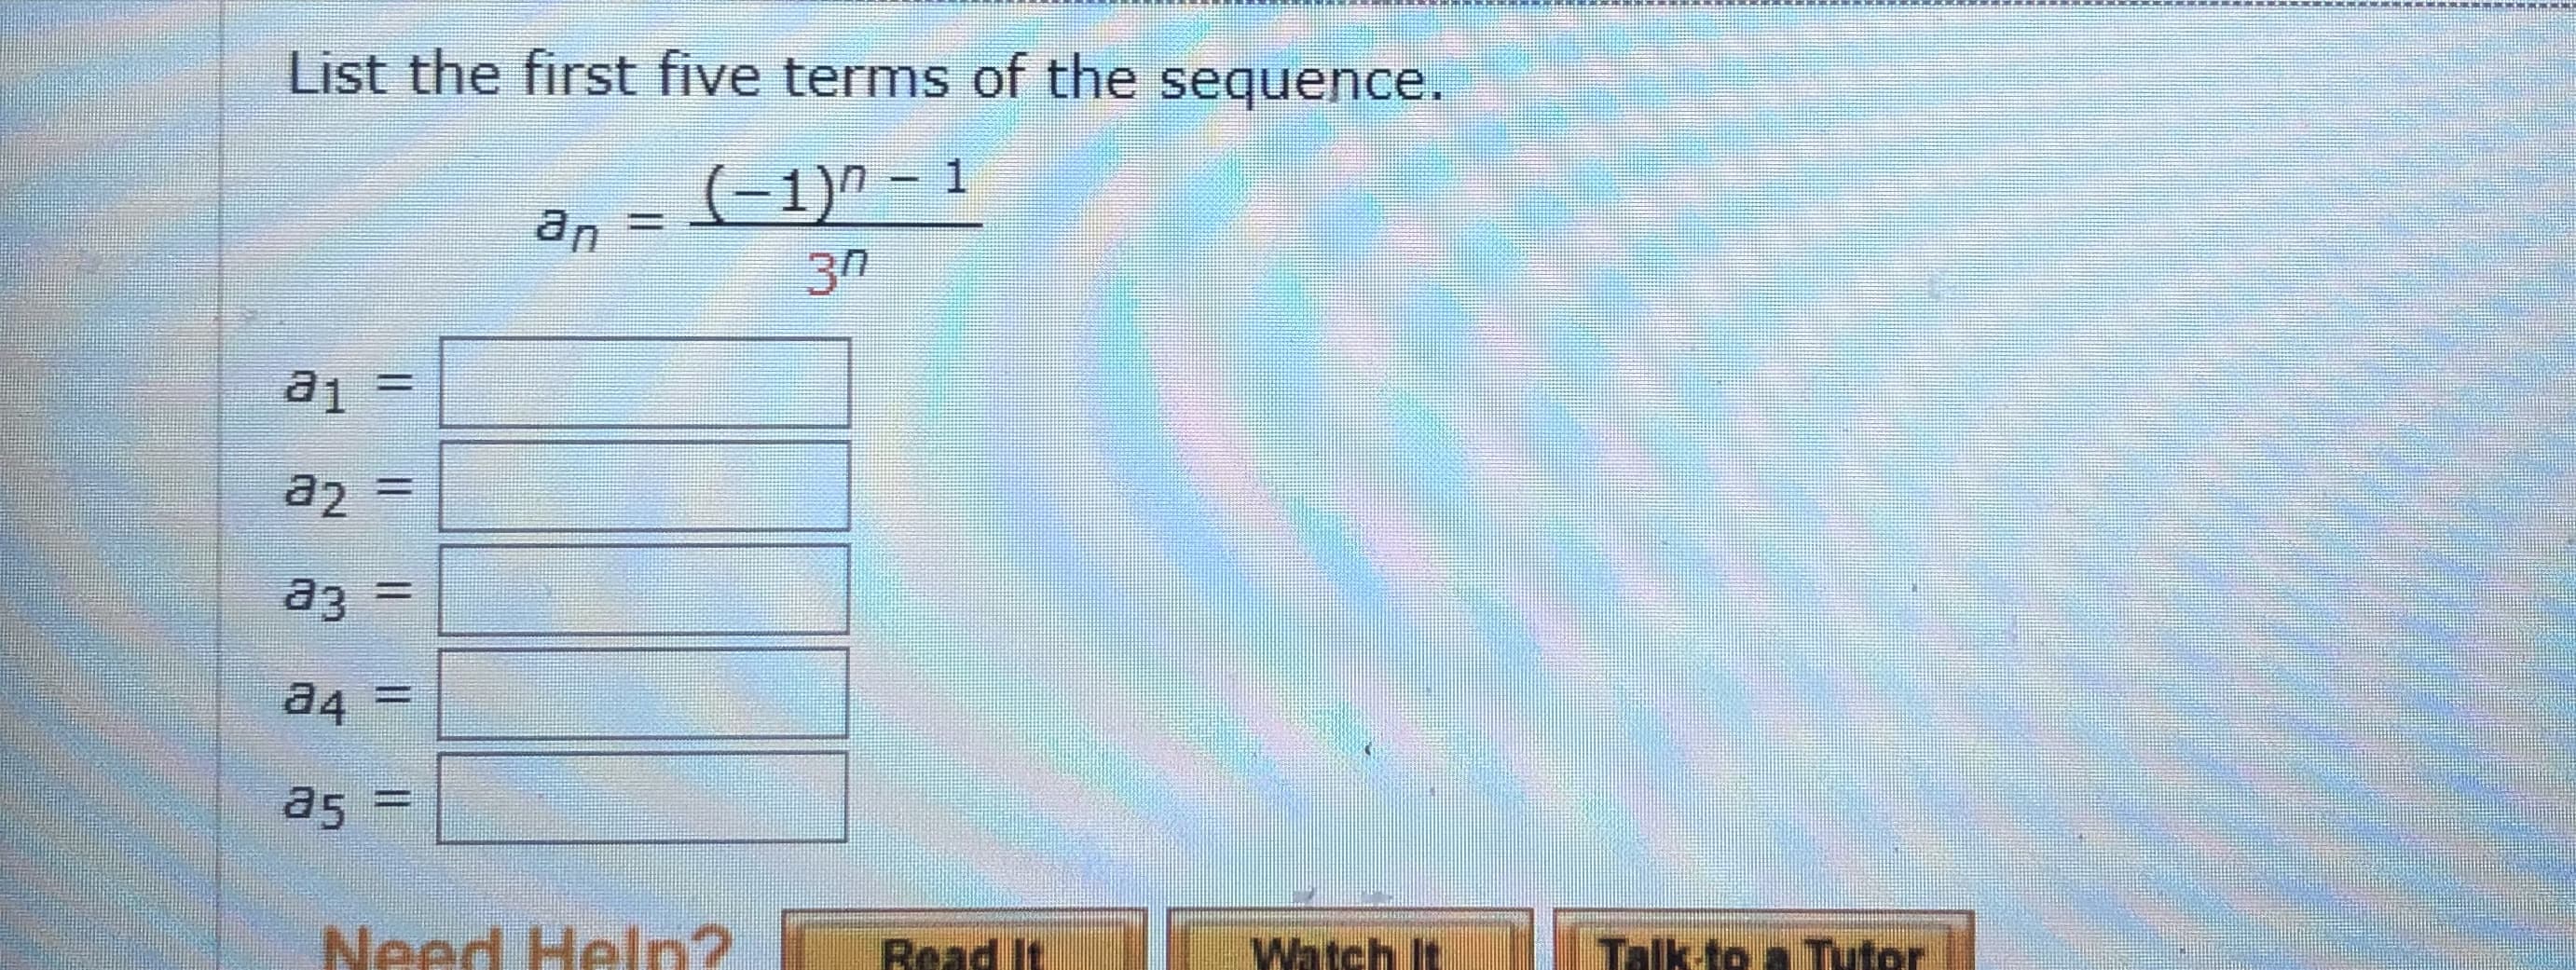 List the first five terms of the sequence.
(-1)^ - 1
an
3n
